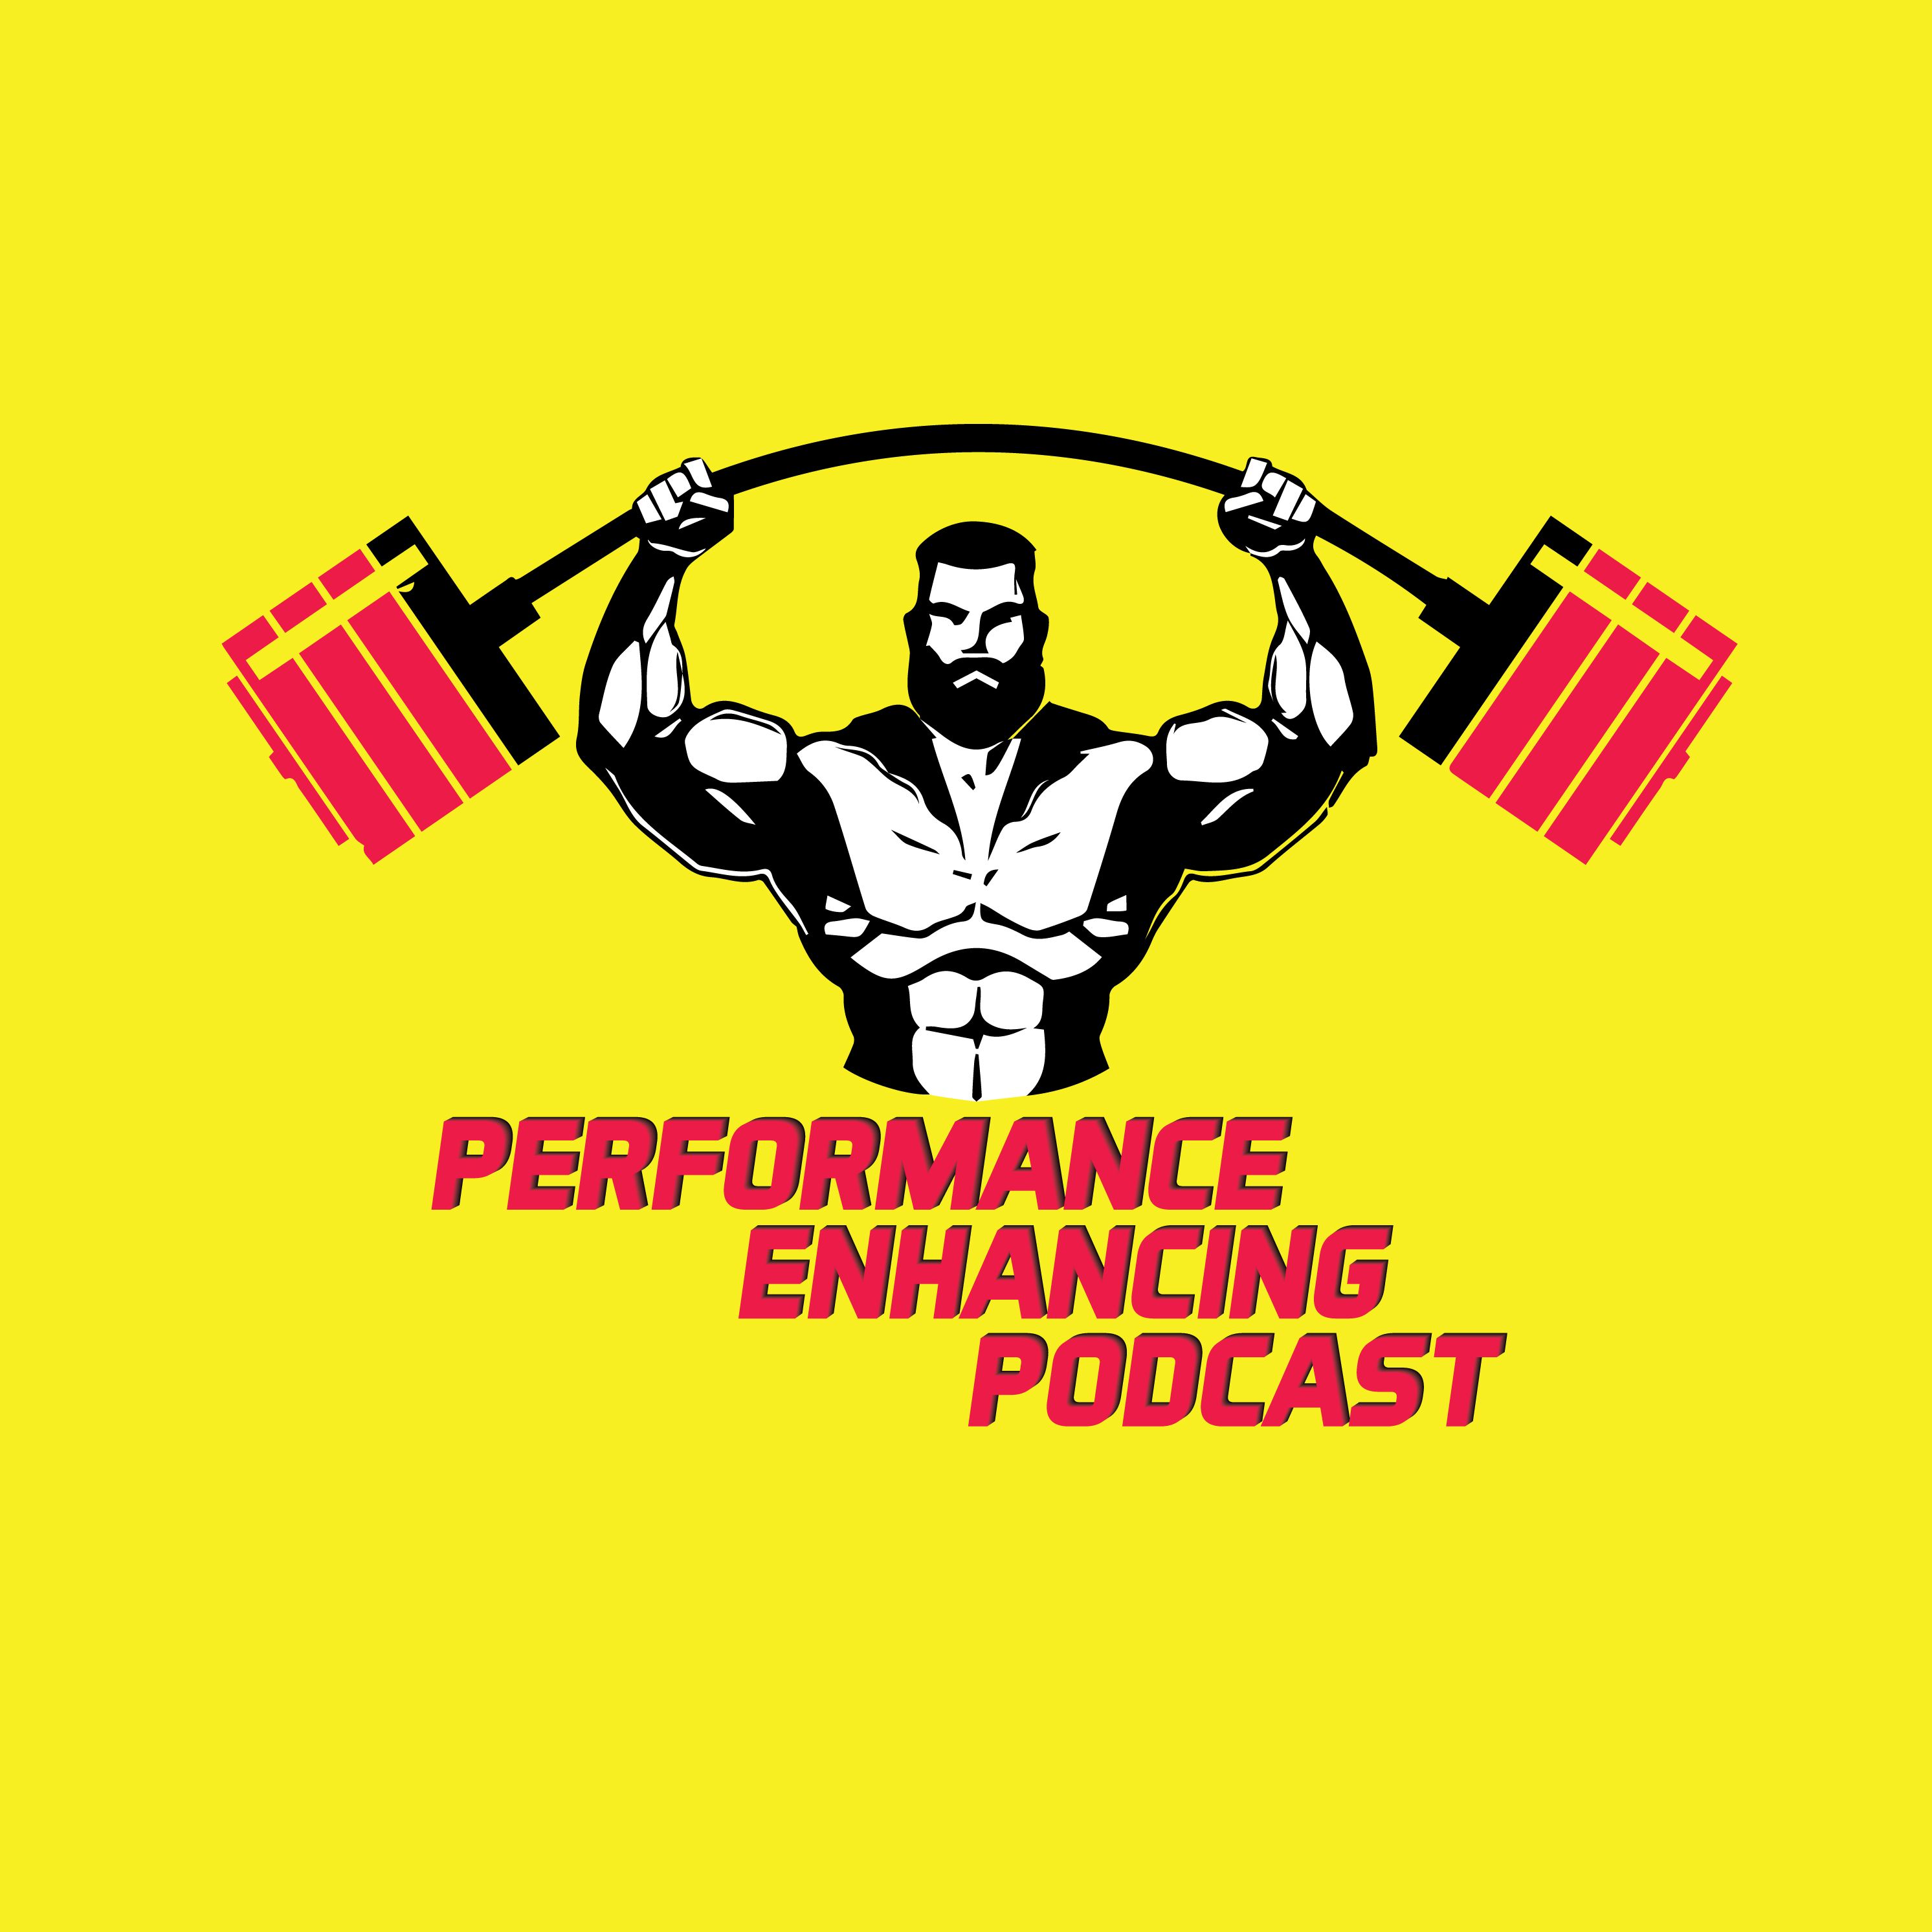 The Performance Enhancing Podcast